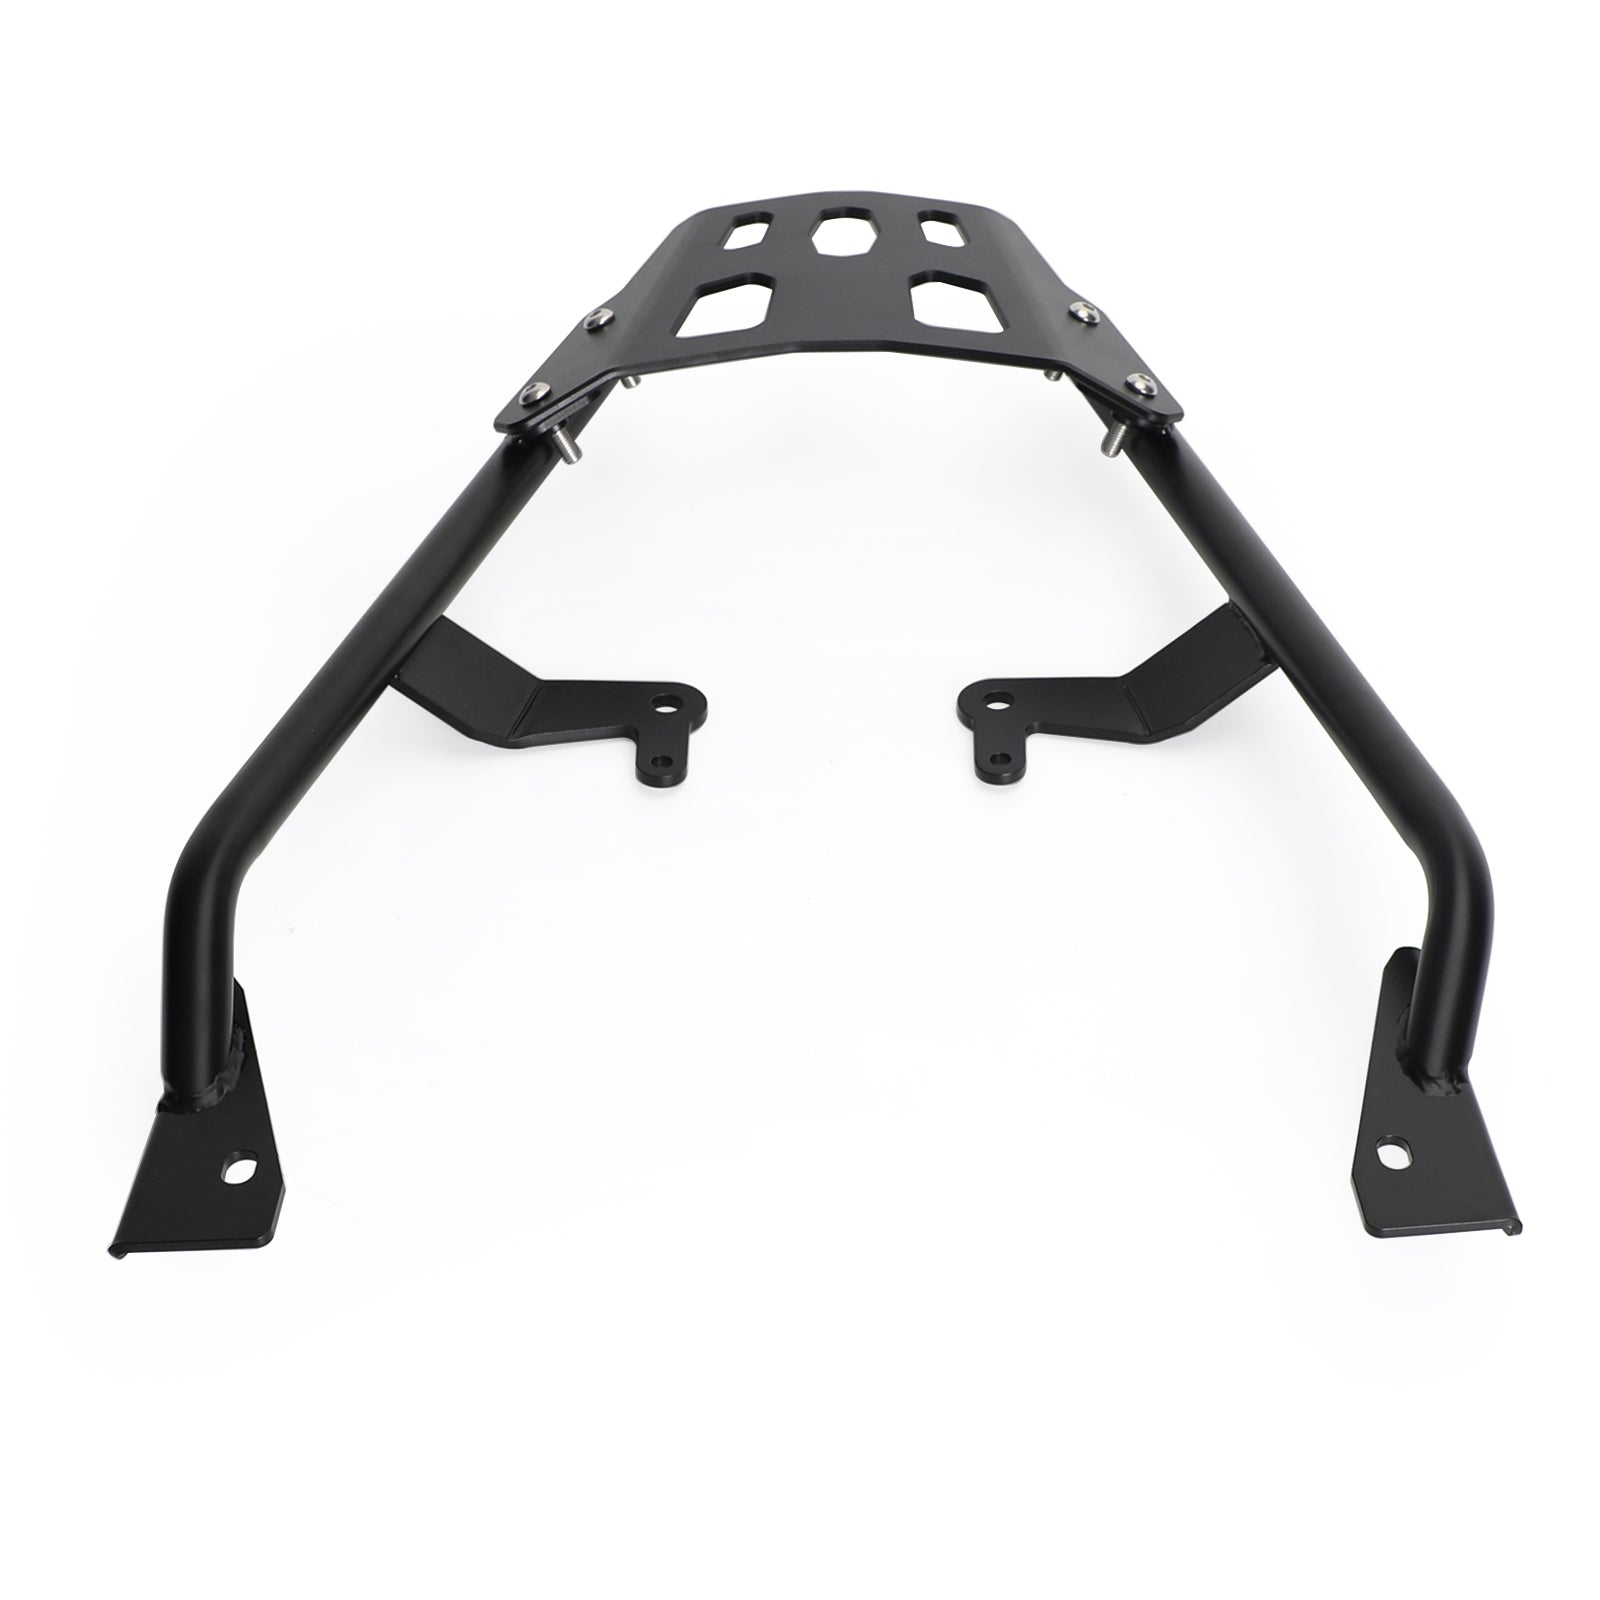 Rear Carrier Tail Luggage Rack Mount Fit for Honda X-ADV 750 XADV 750 2021 Generic